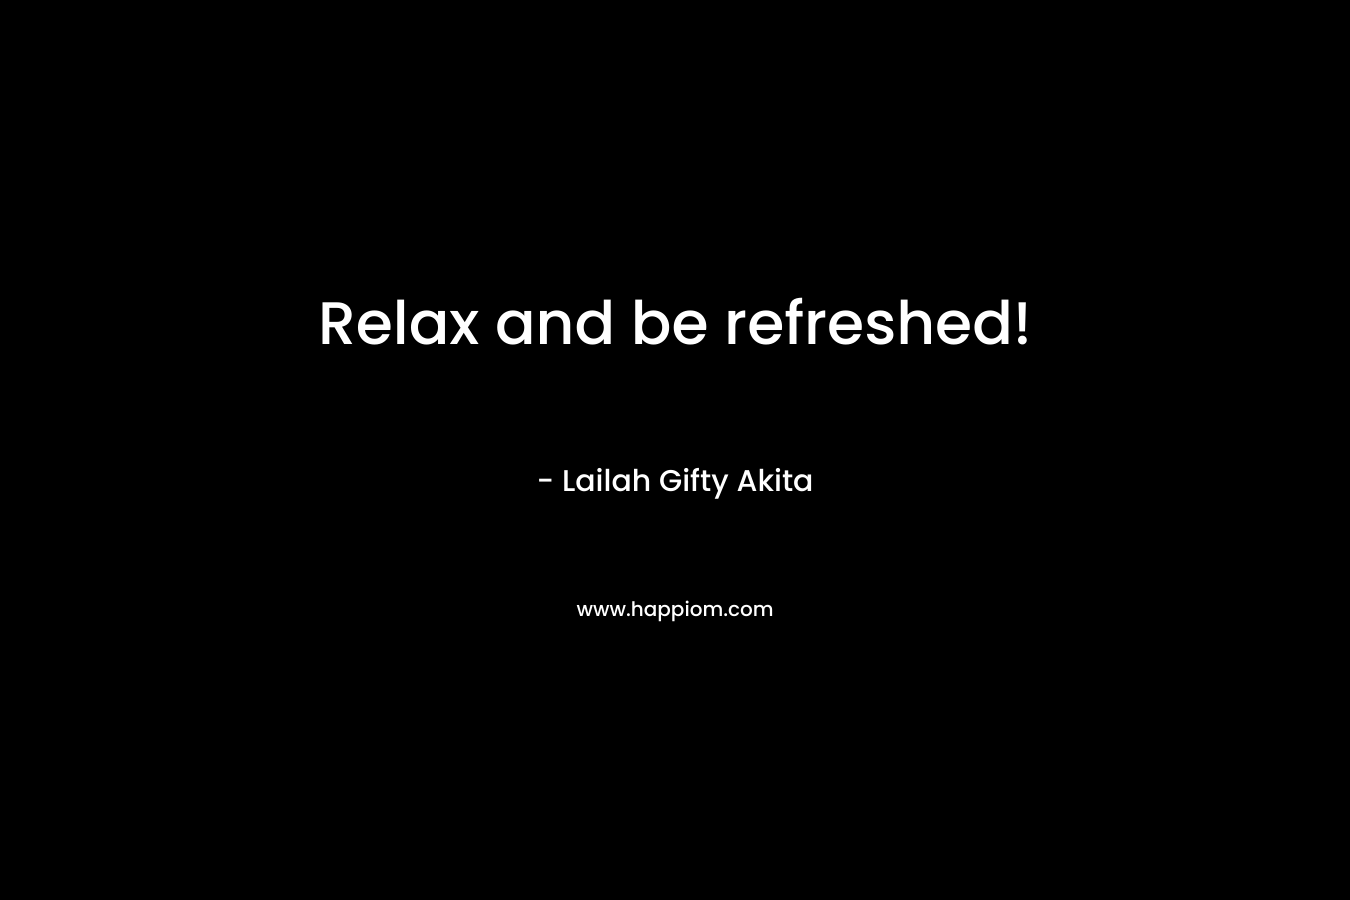 Relax and be refreshed! – Lailah Gifty Akita